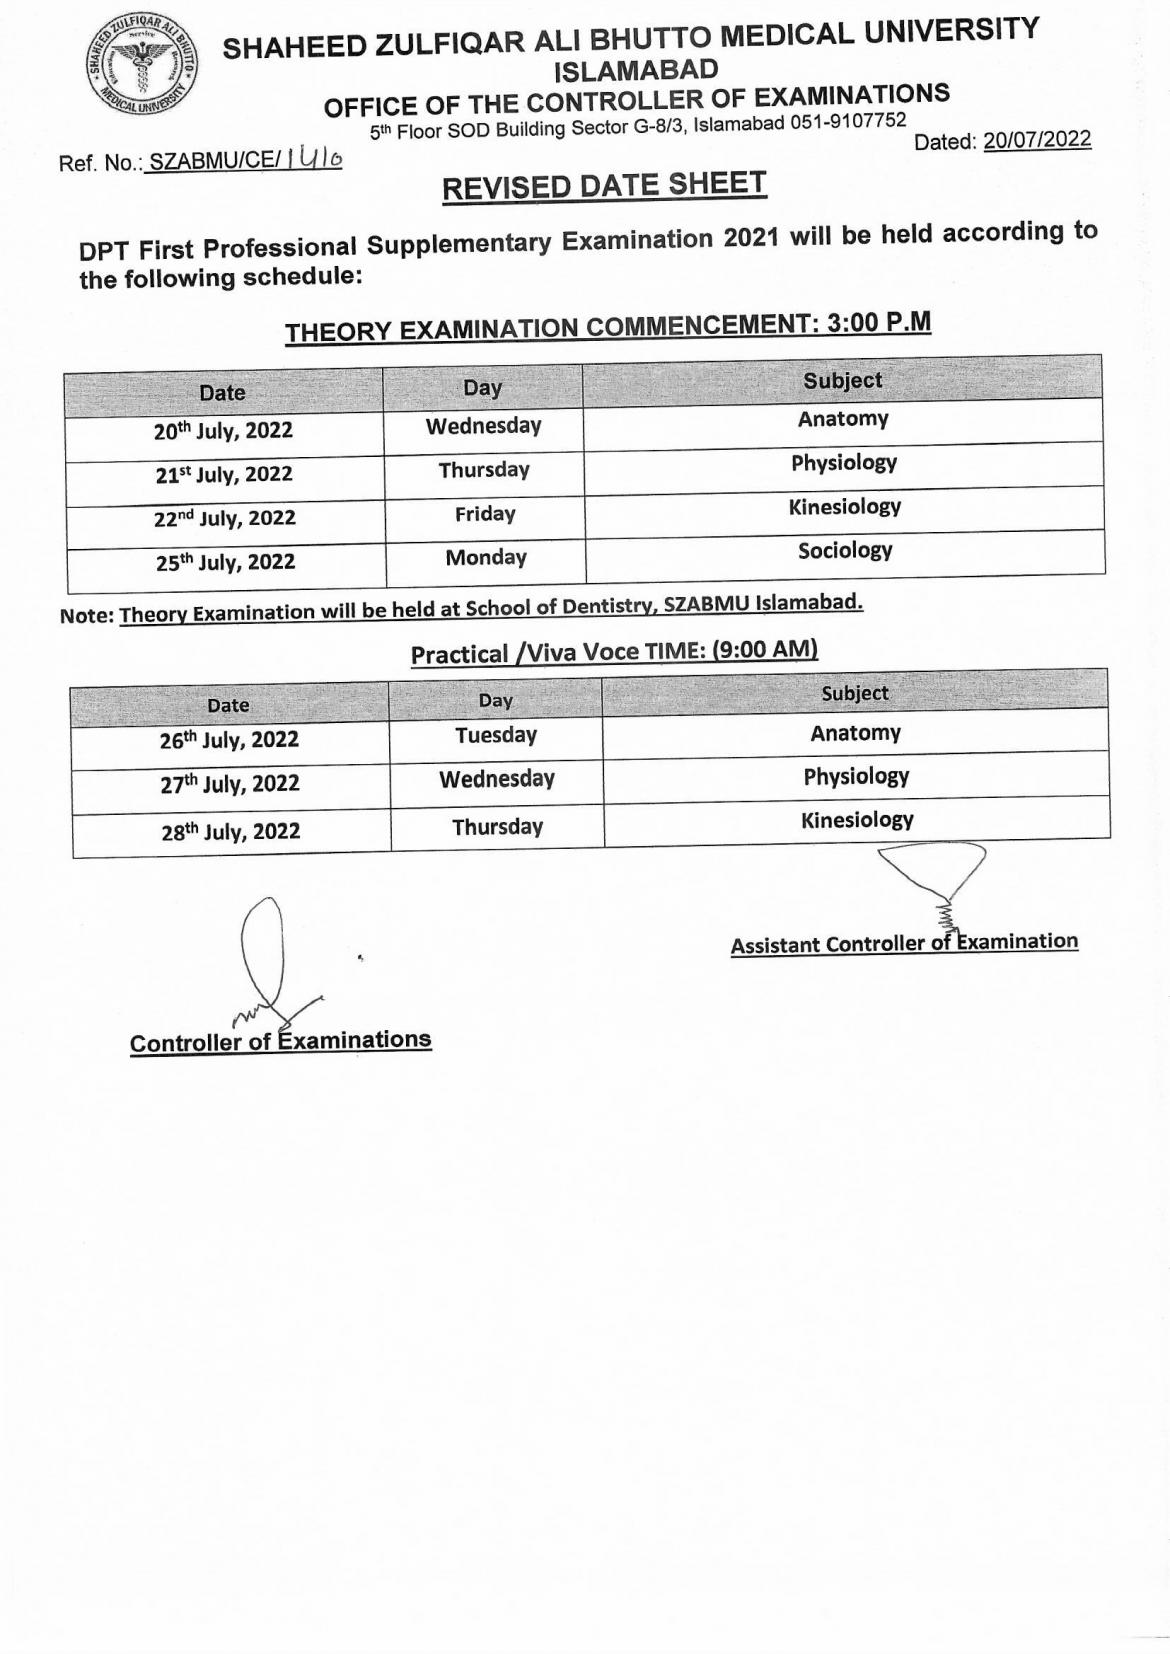 Revised Date Sheet - DPT 1st Professional Supplementary Examinations 2021